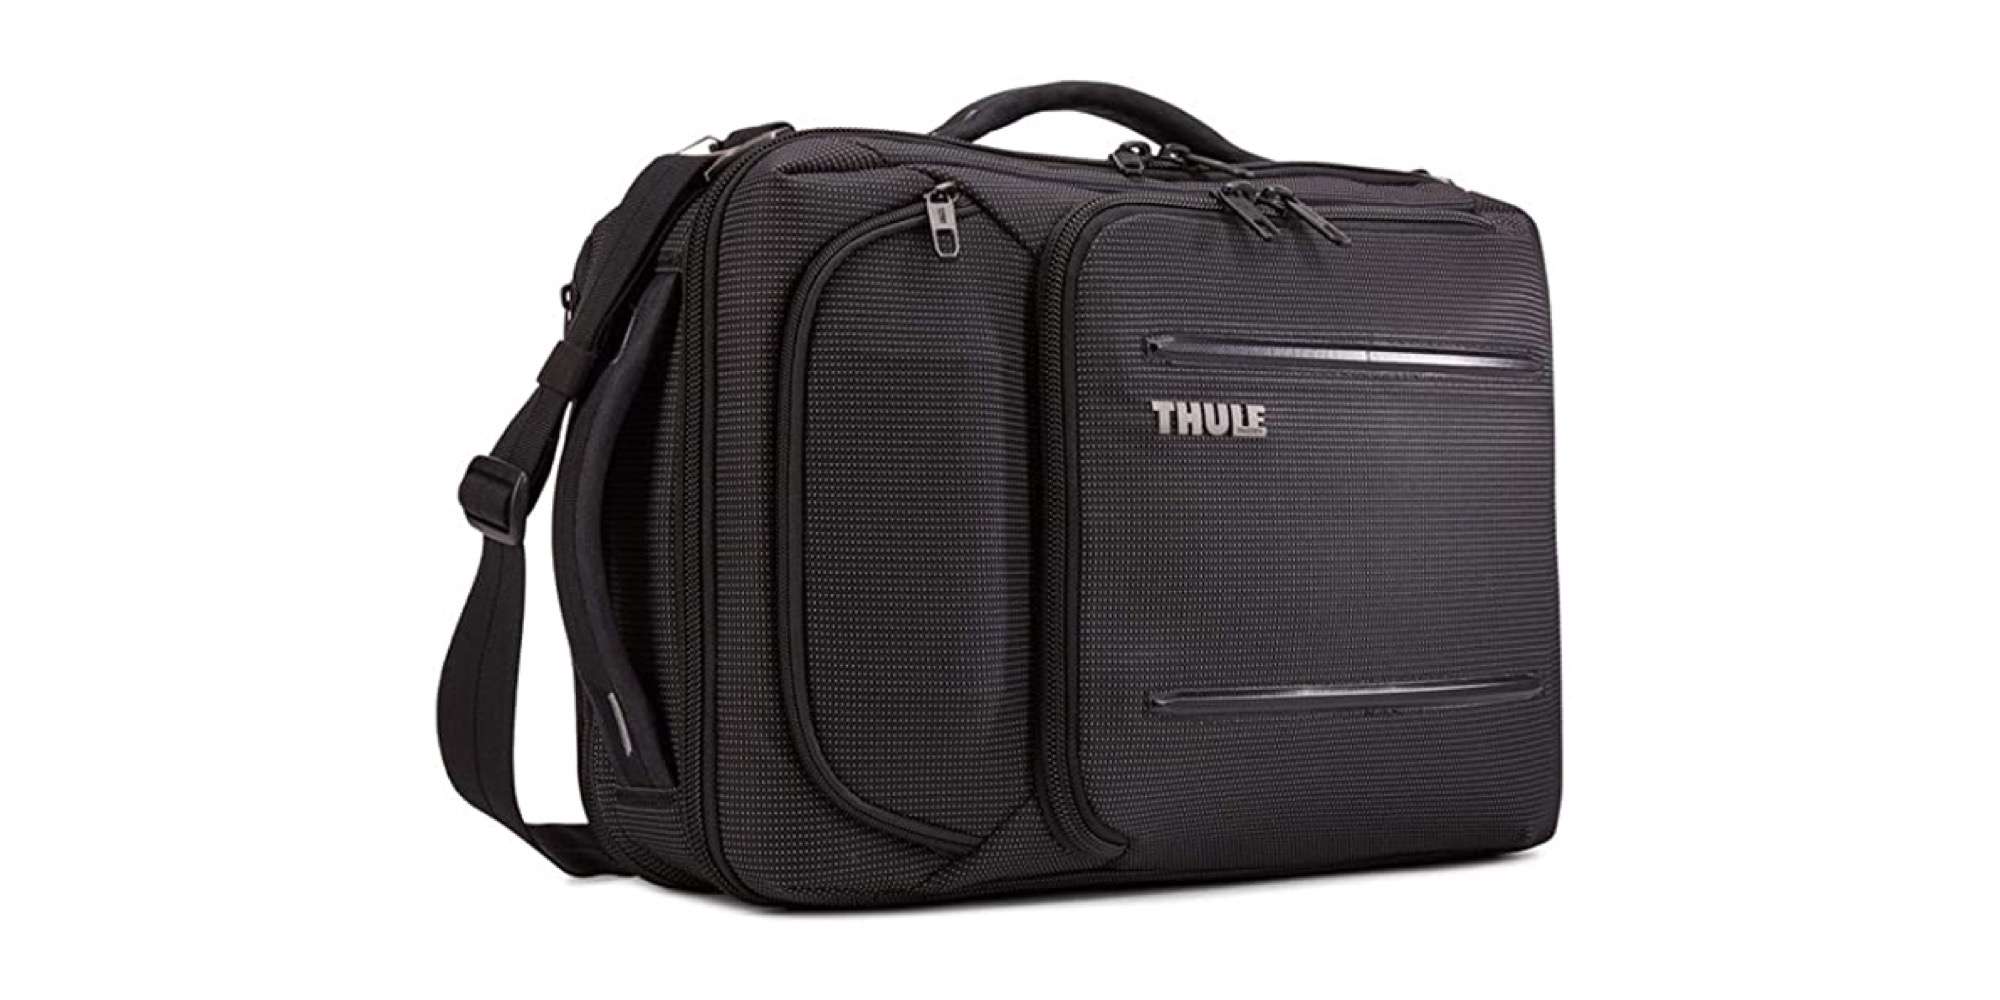 Thule, Osprey, and other brands outline today’s backpack discounts from $33